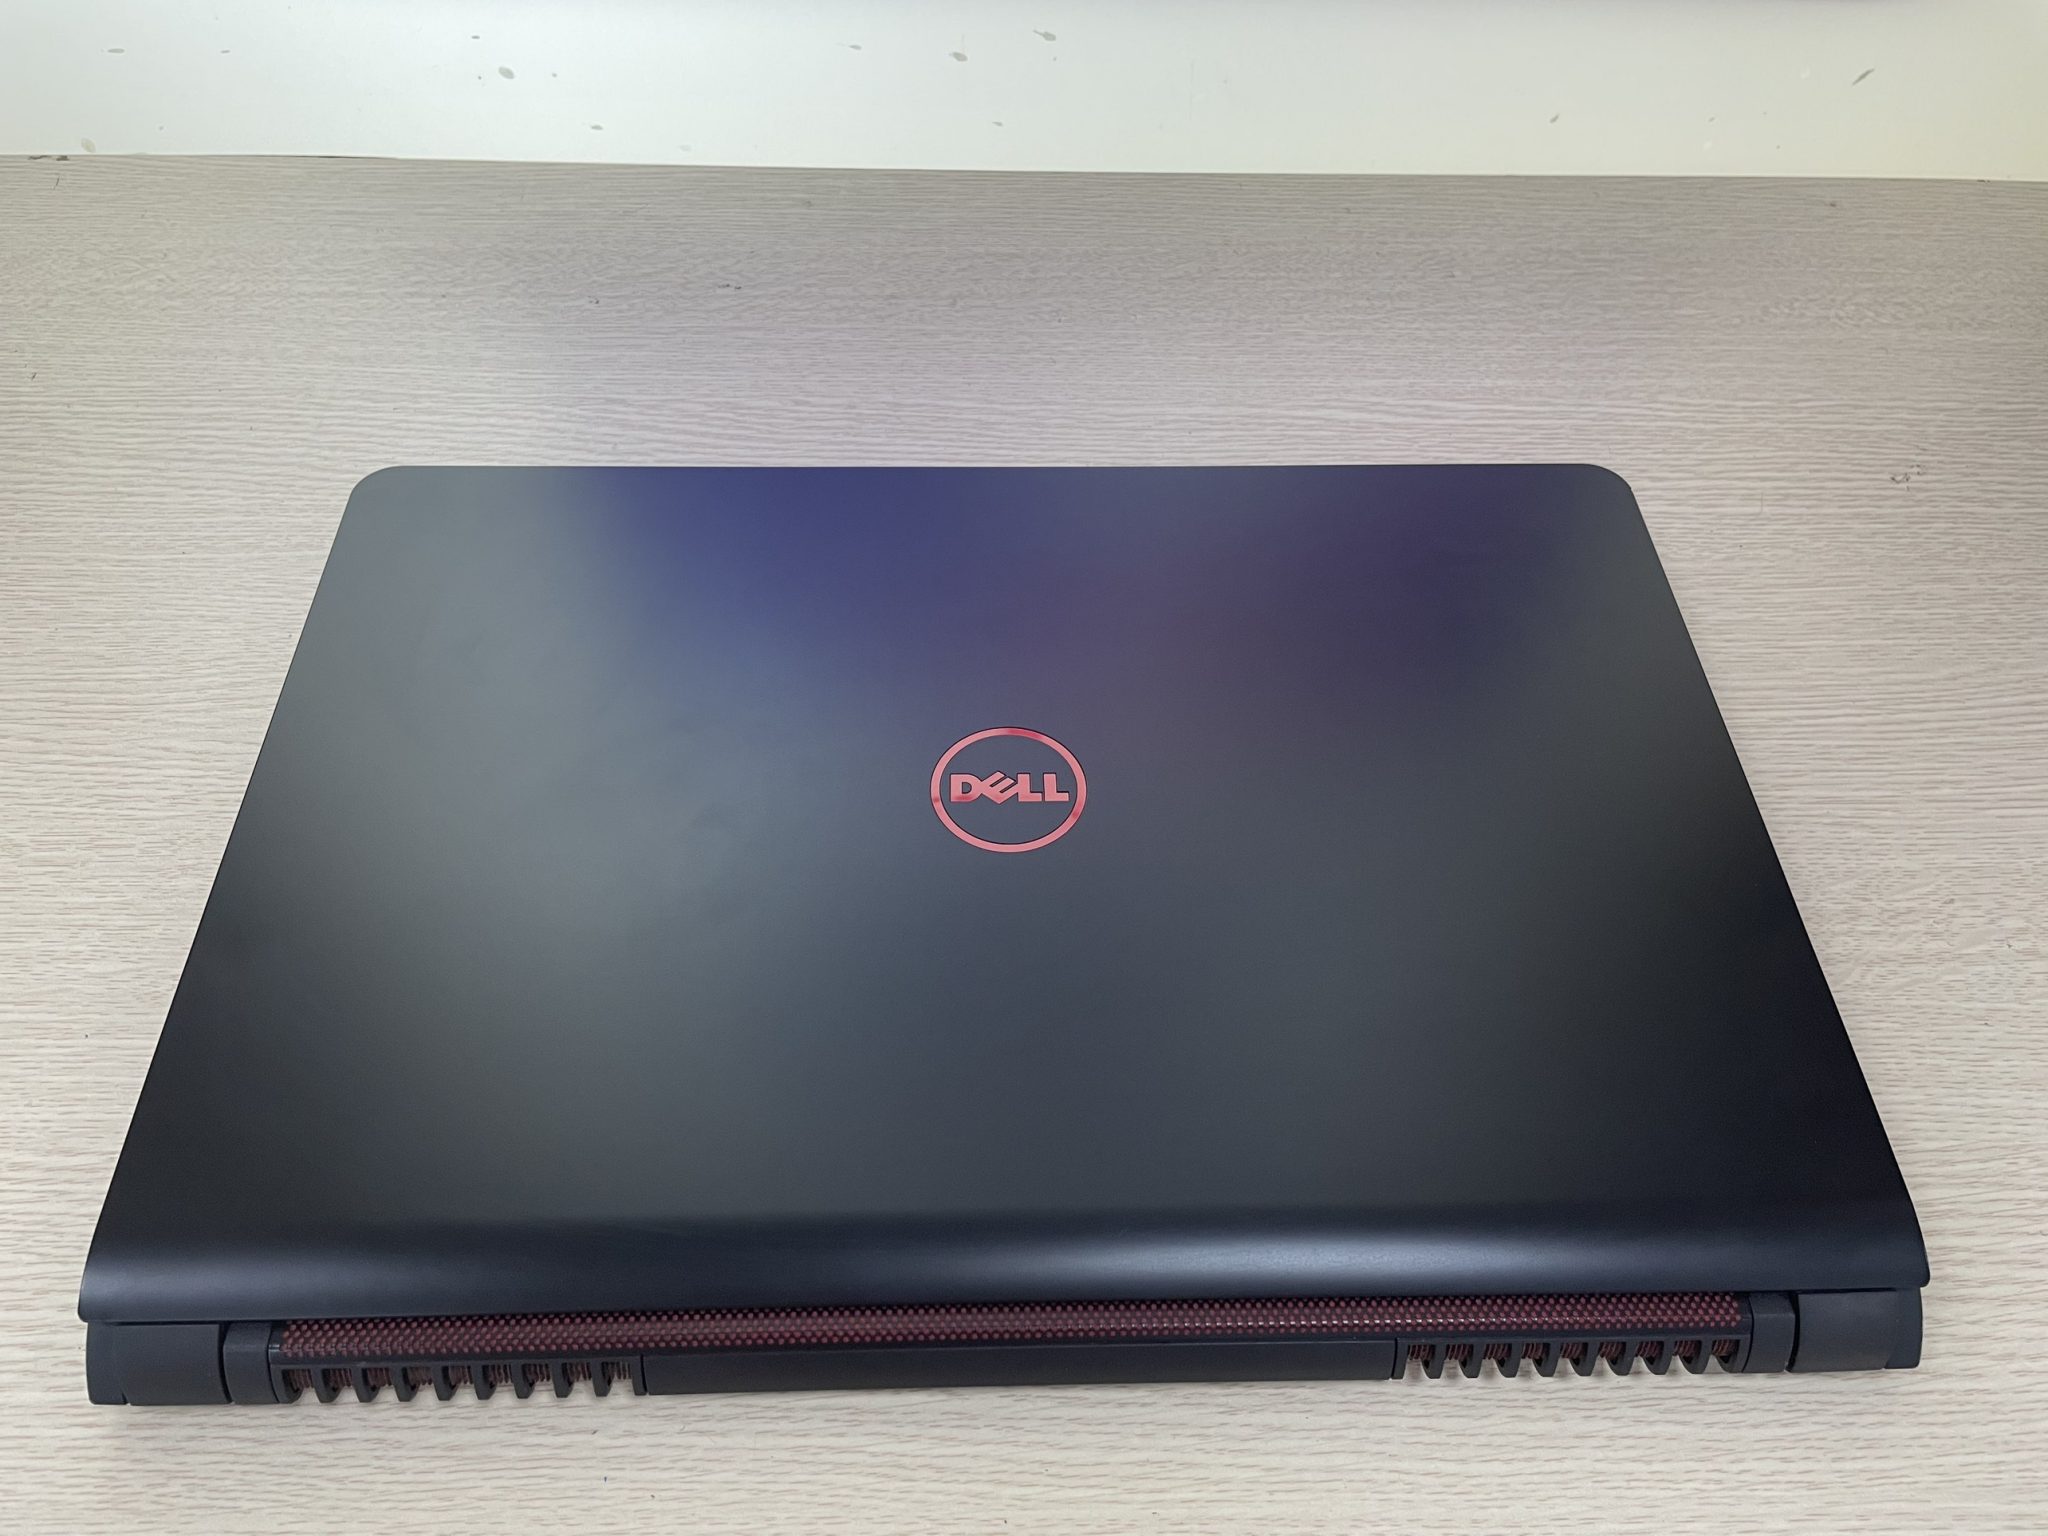 LAPTOP DELL GAMING INSPIRON 7559 I7